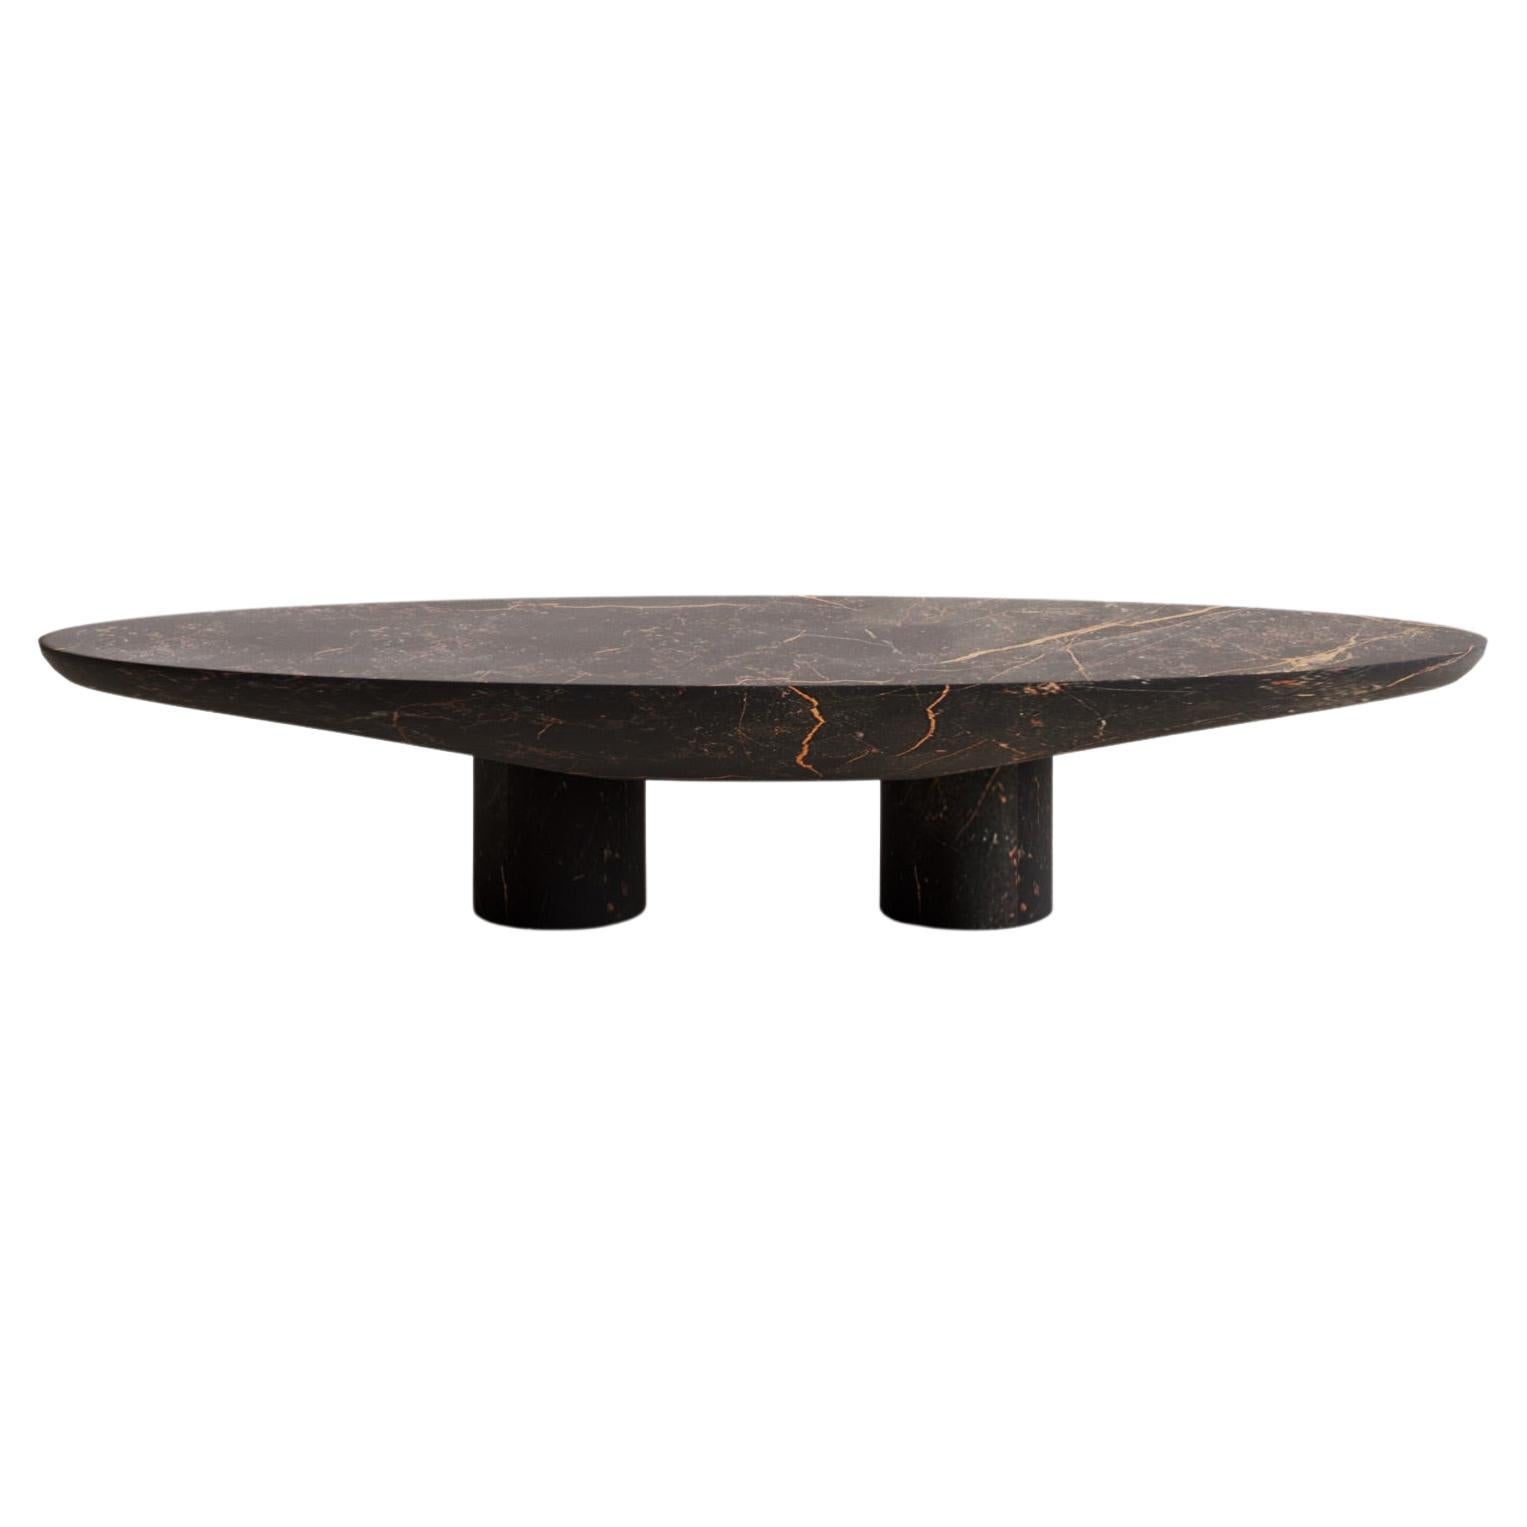 Solid Port Saint Laurent Abraccio Oval Coffee Table 140 by Studio Narra For Sale